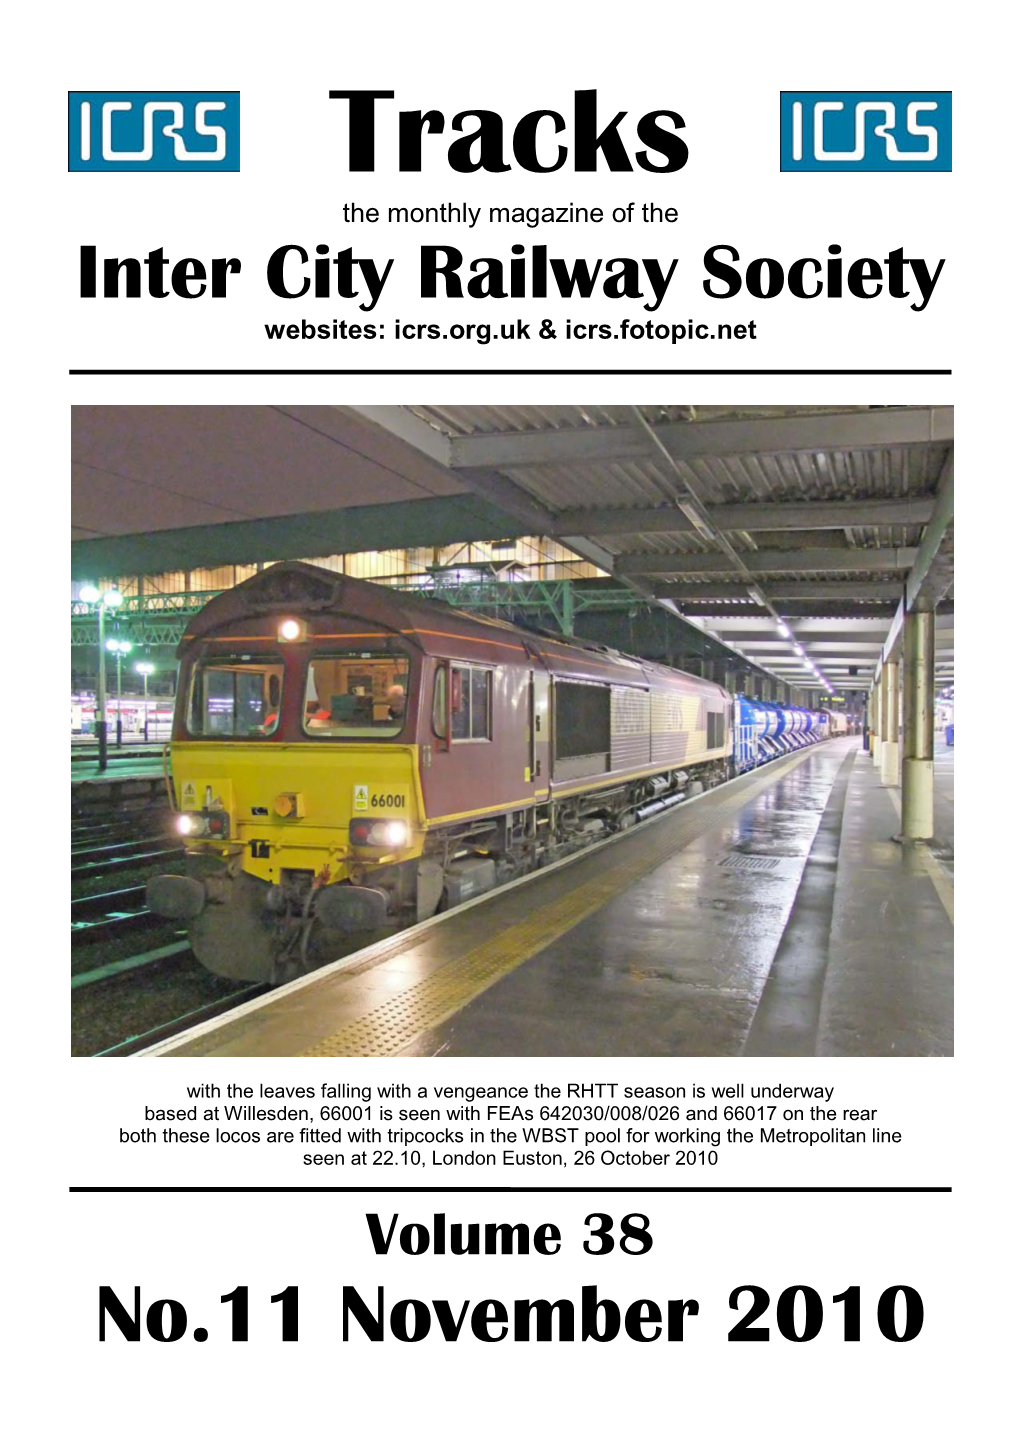 Tracks the Monthly Magazine of the Inter City Railway Society Websites: Icrs.Org.Uk & Icrs.Fotopic.Net